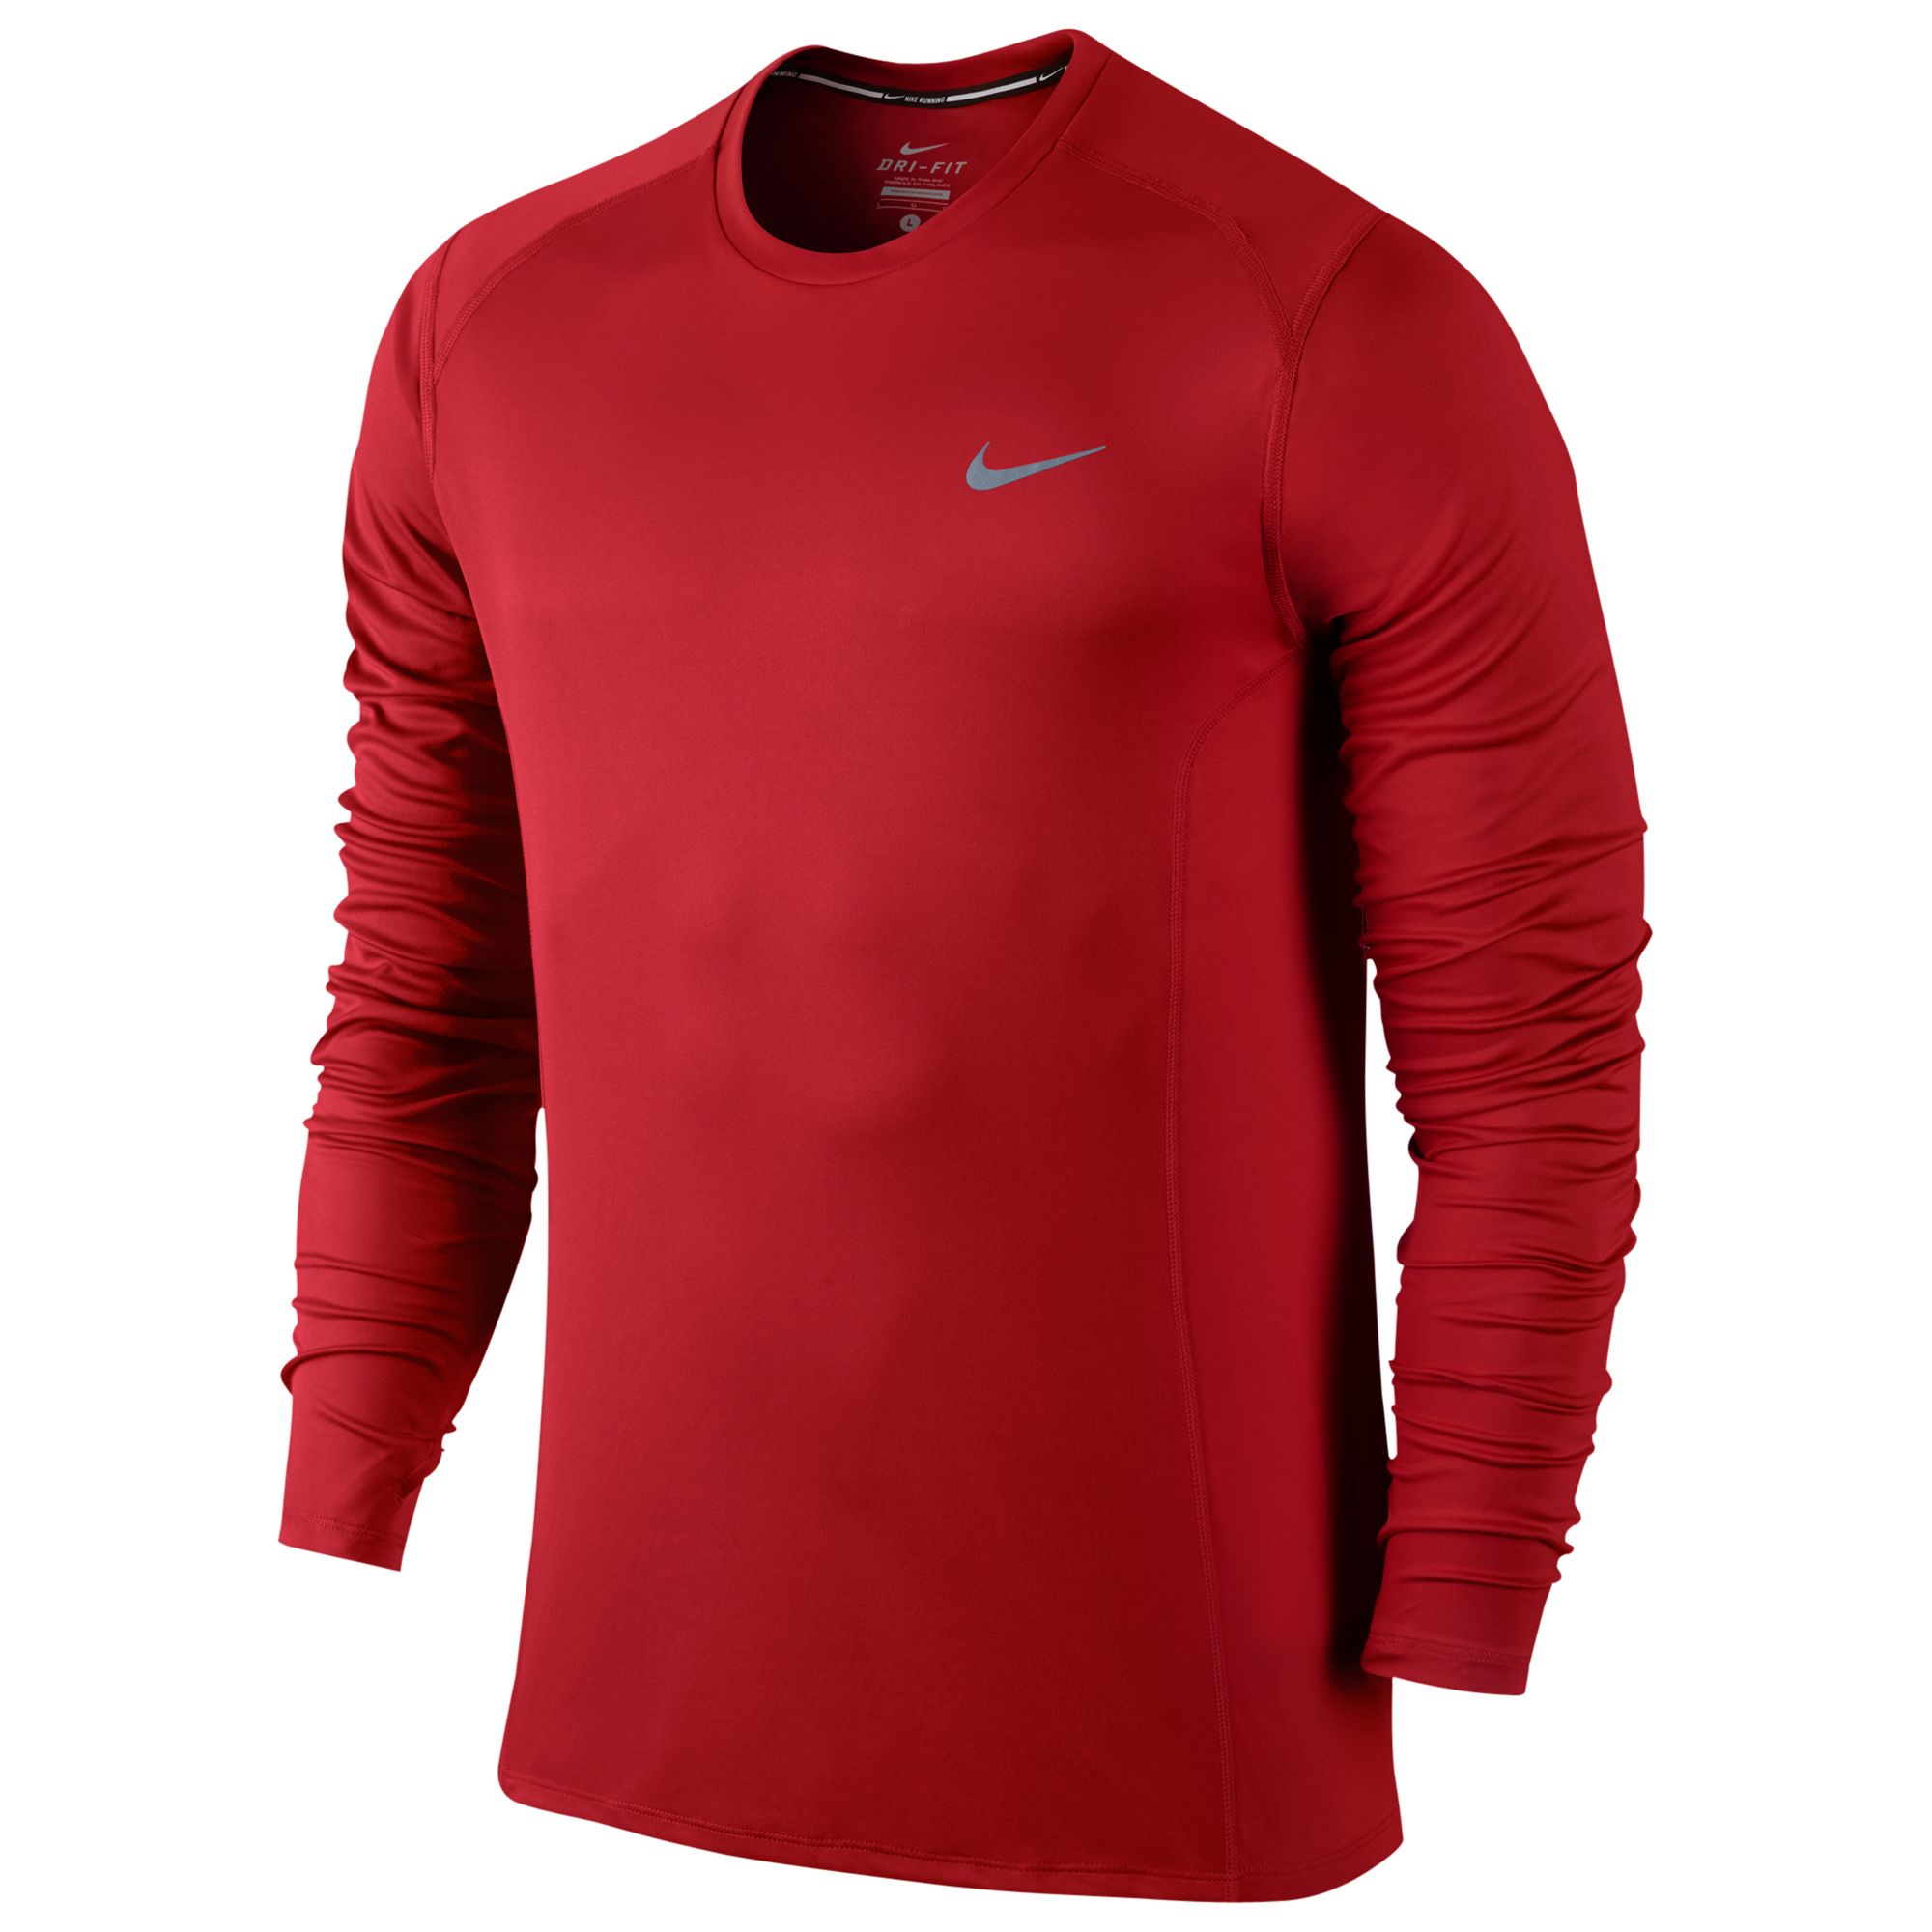 red long sleeve dri fit